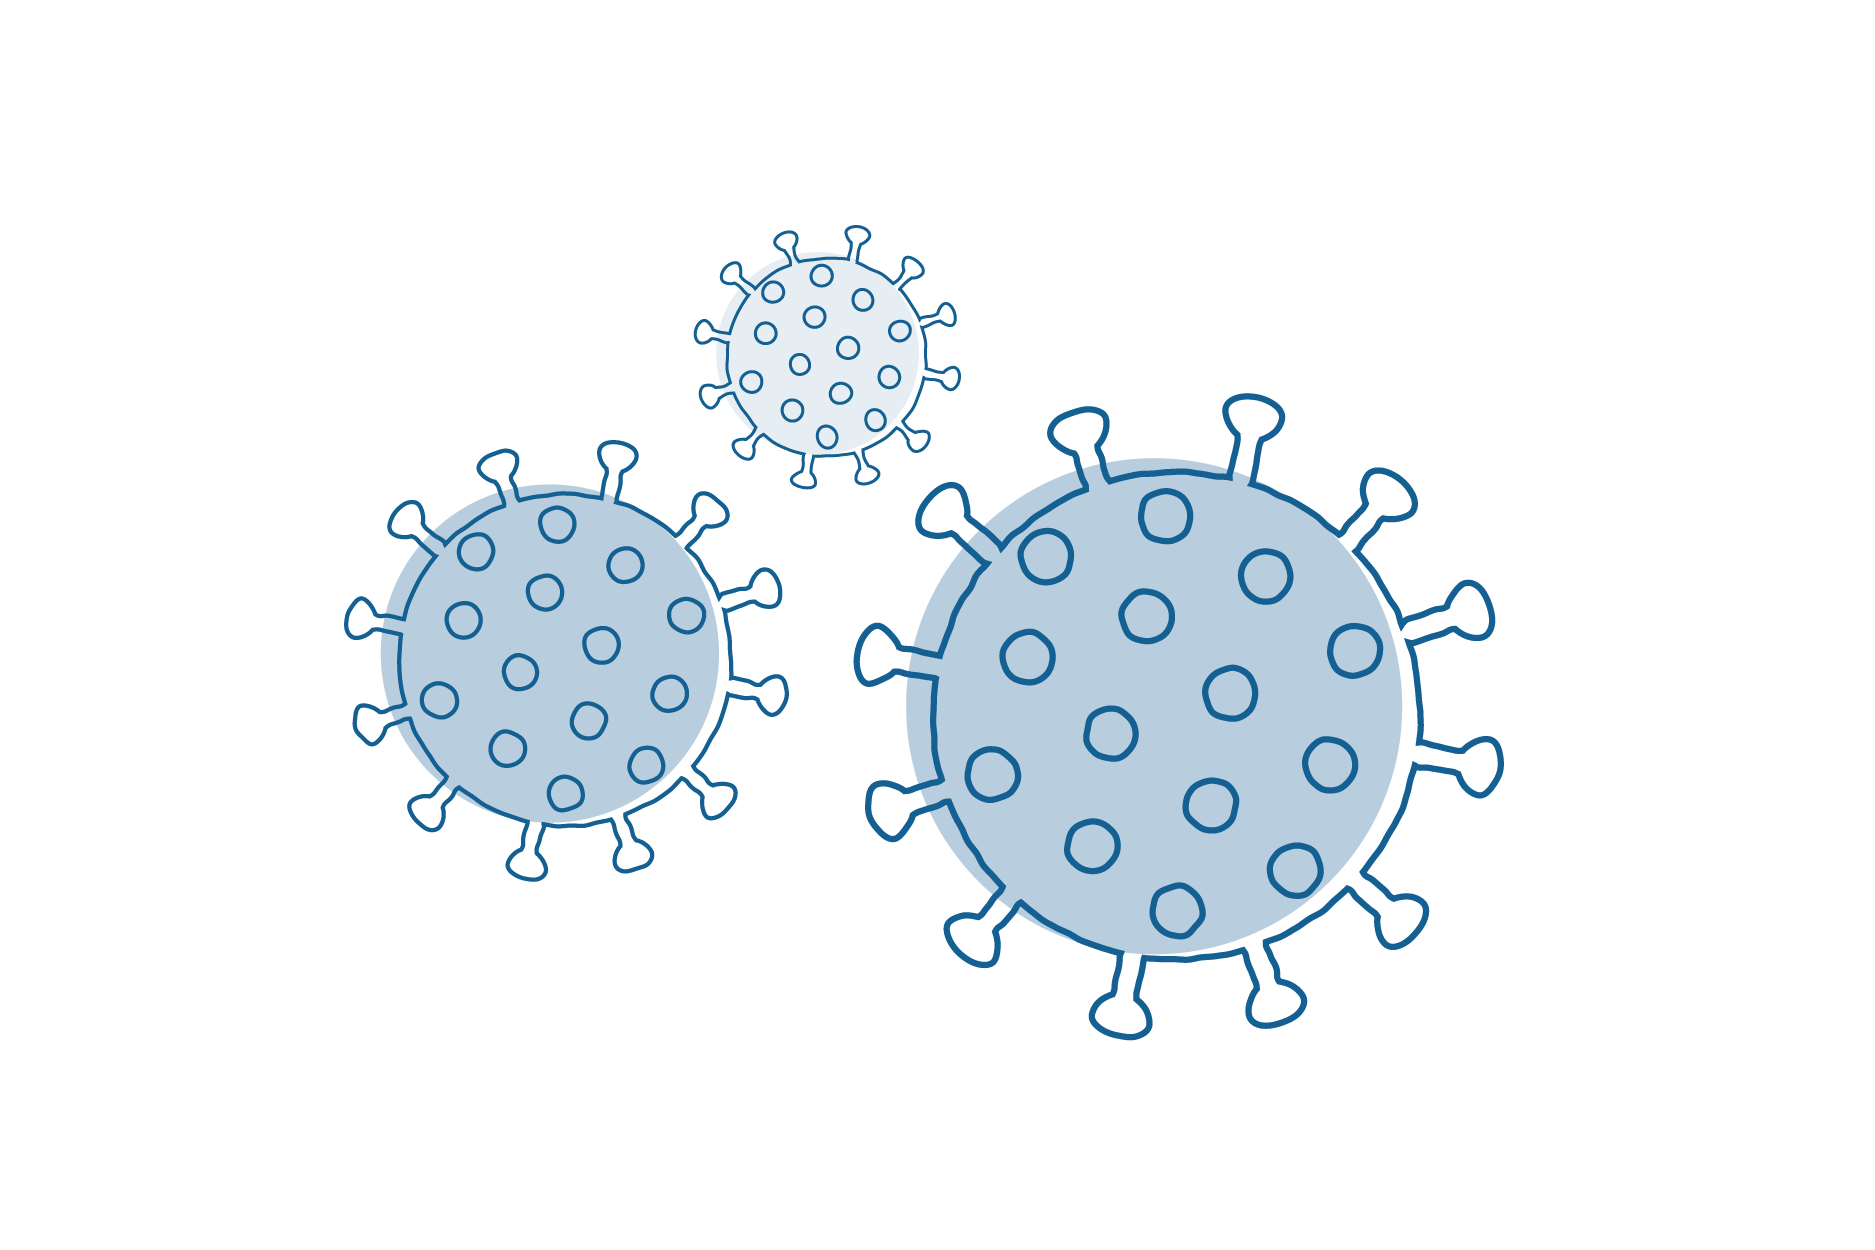 An illustration of the coronavirus cell with spikes all over it.